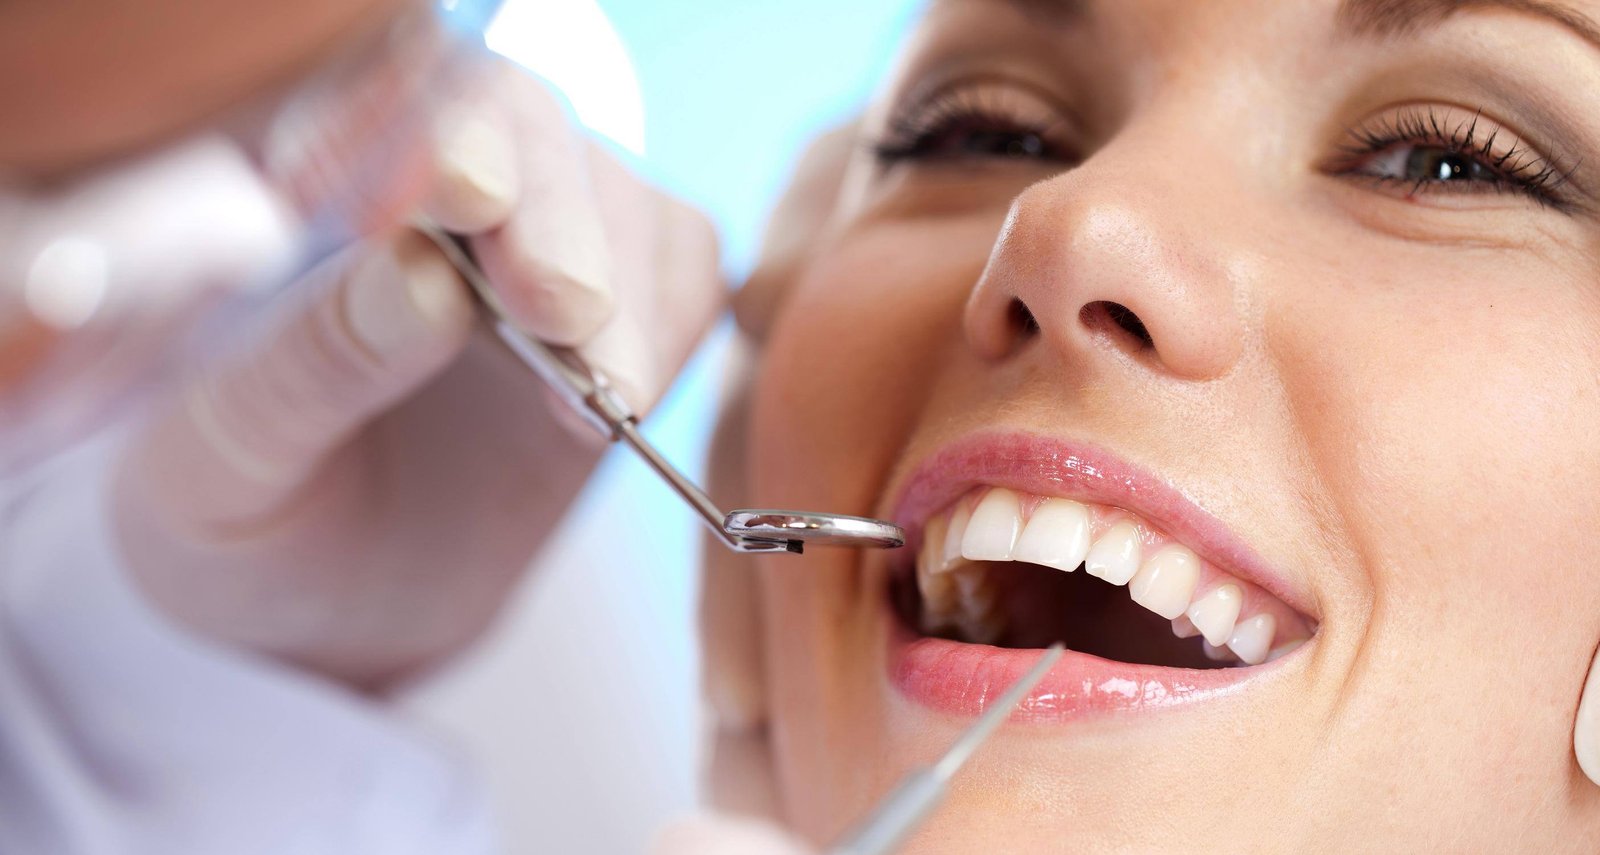 Should I Go For The Regular Check-Up Of The Oral Health?